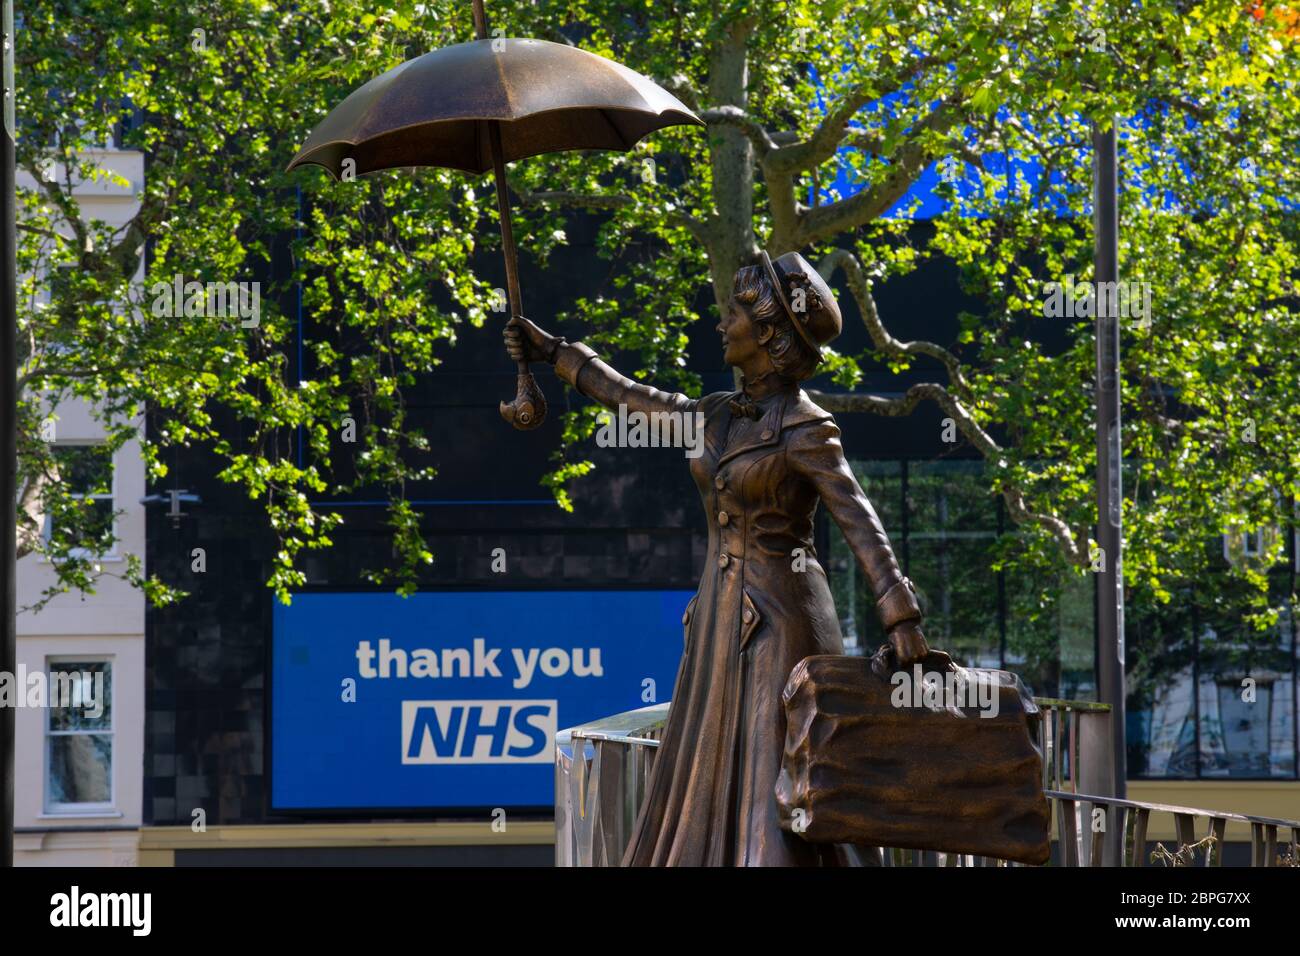 A statue of film character Mary Poppins in London's Leicester Square seen in front of billboard on the Odeon cinema thanking NHS workers. The square i Stock Photo